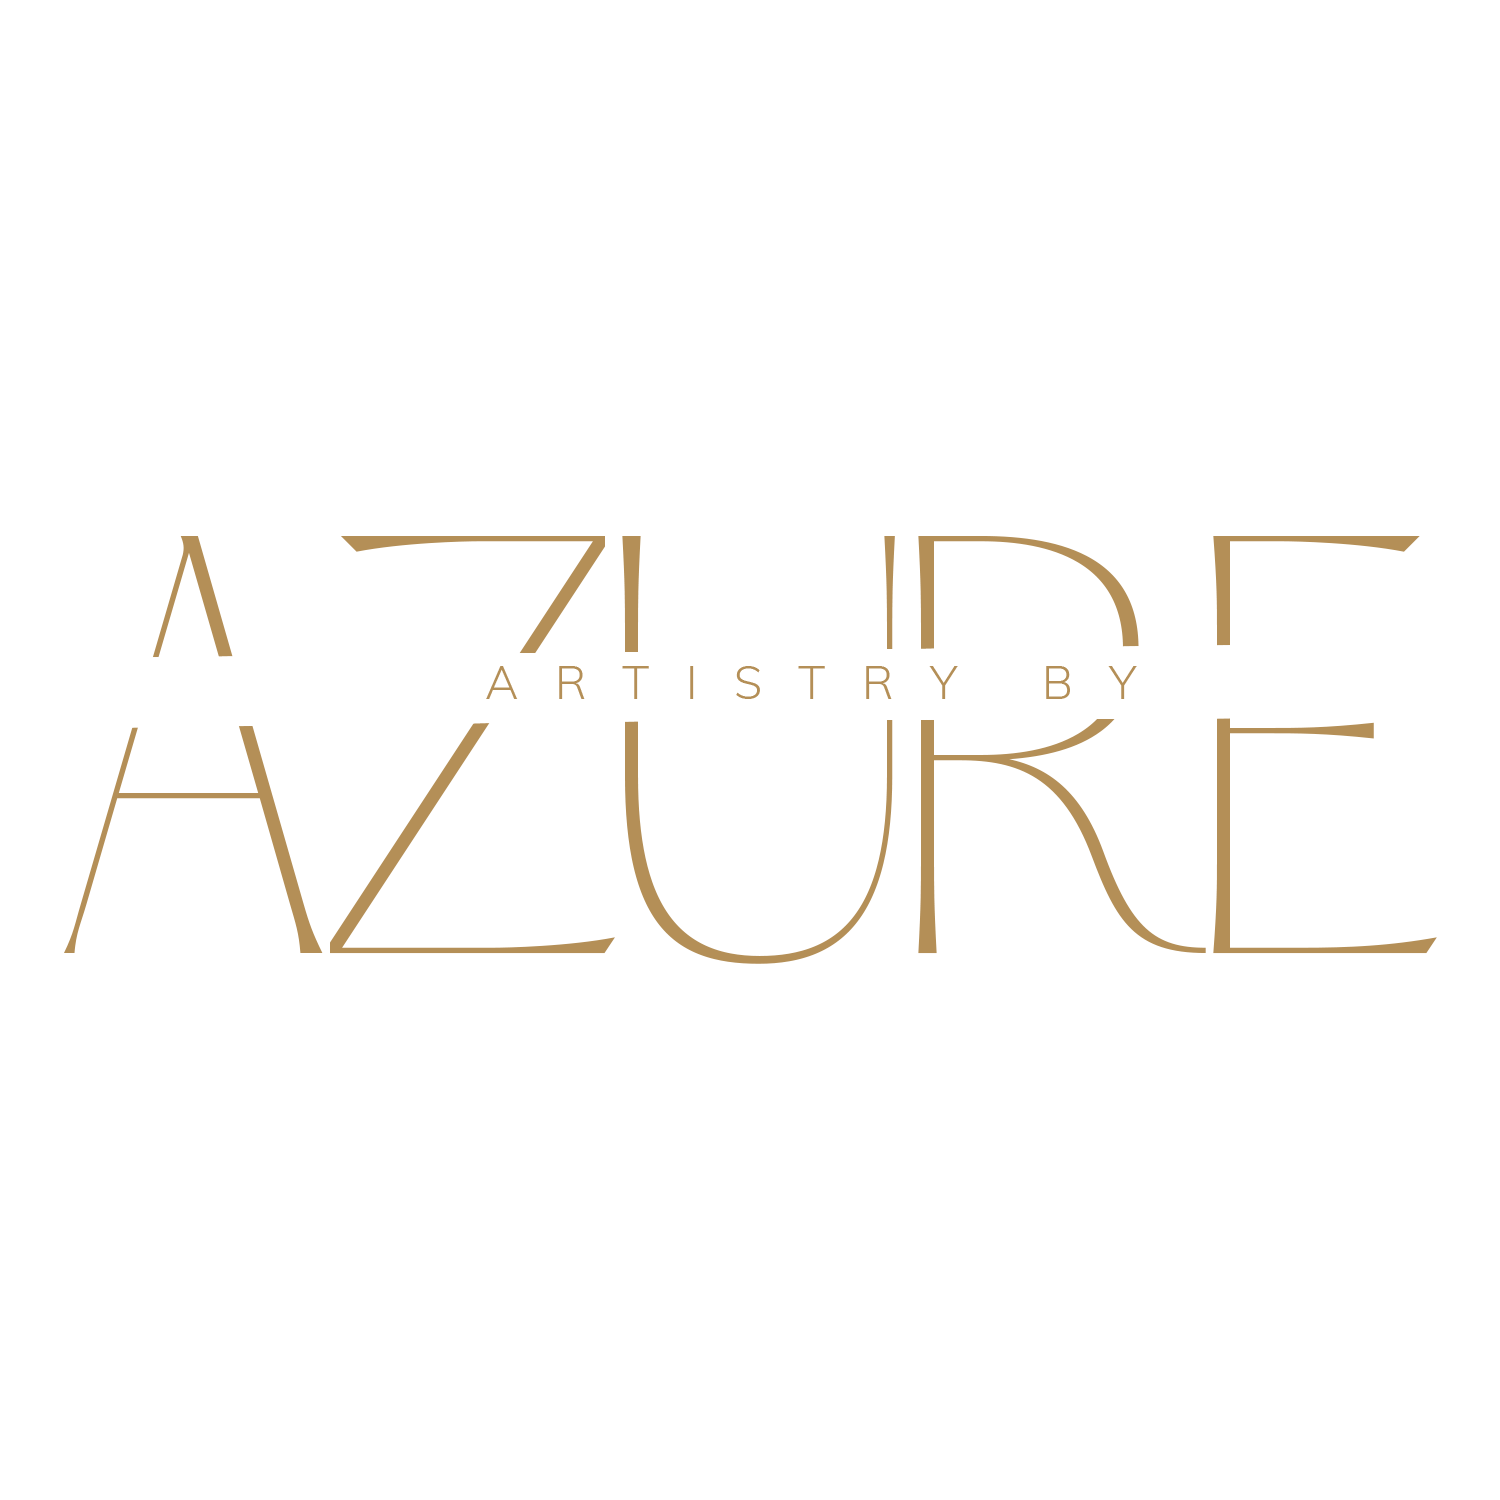 Artistry by Azure